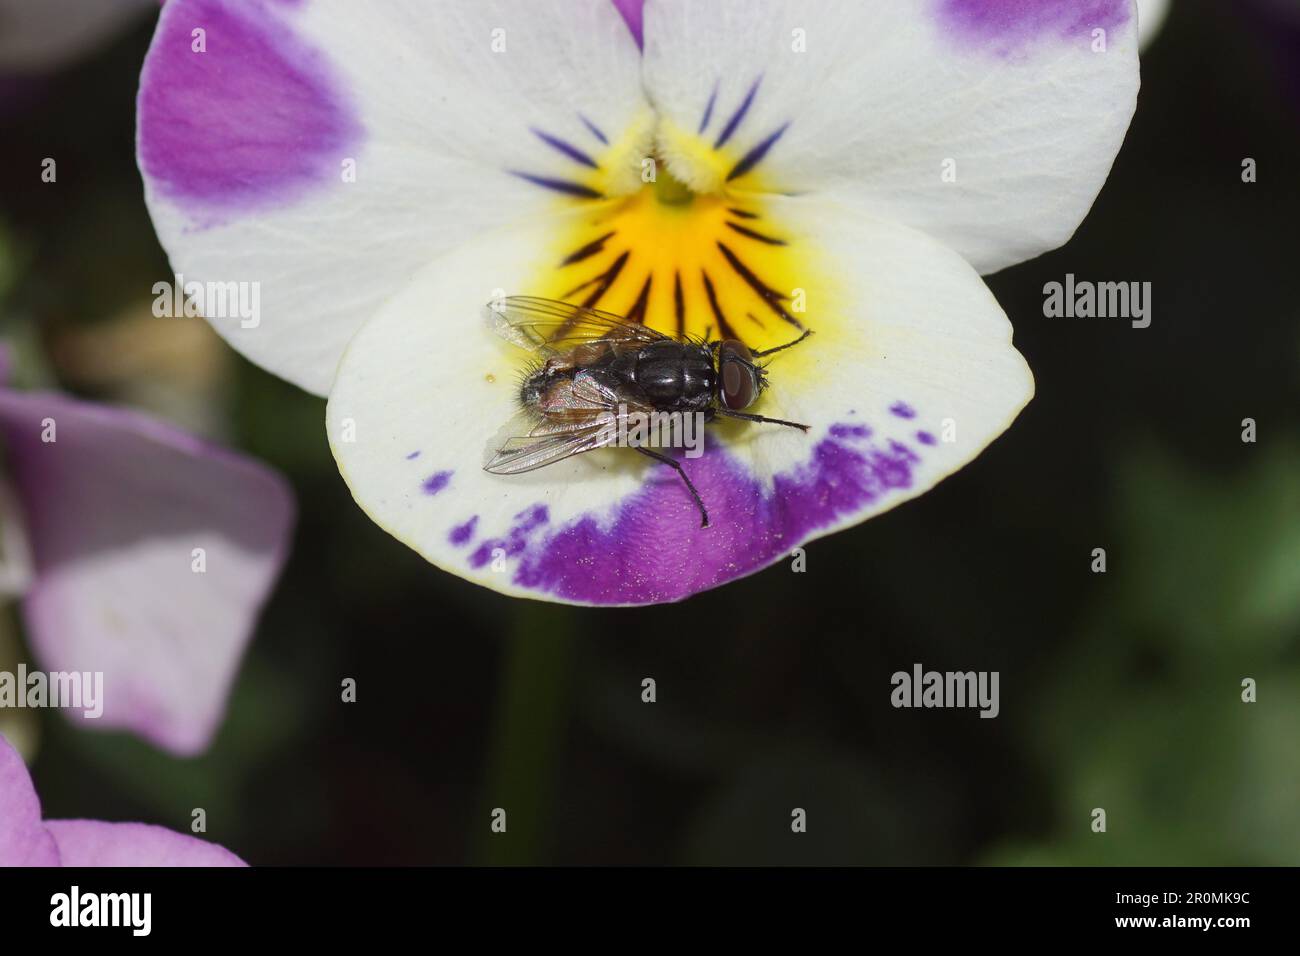 Male face fly, autumn housefly (Musca autumnalis), family Muscidae on a flower of garden pansy Viola cornuta, Violet family Violaceae. Spring, May Stock Photo